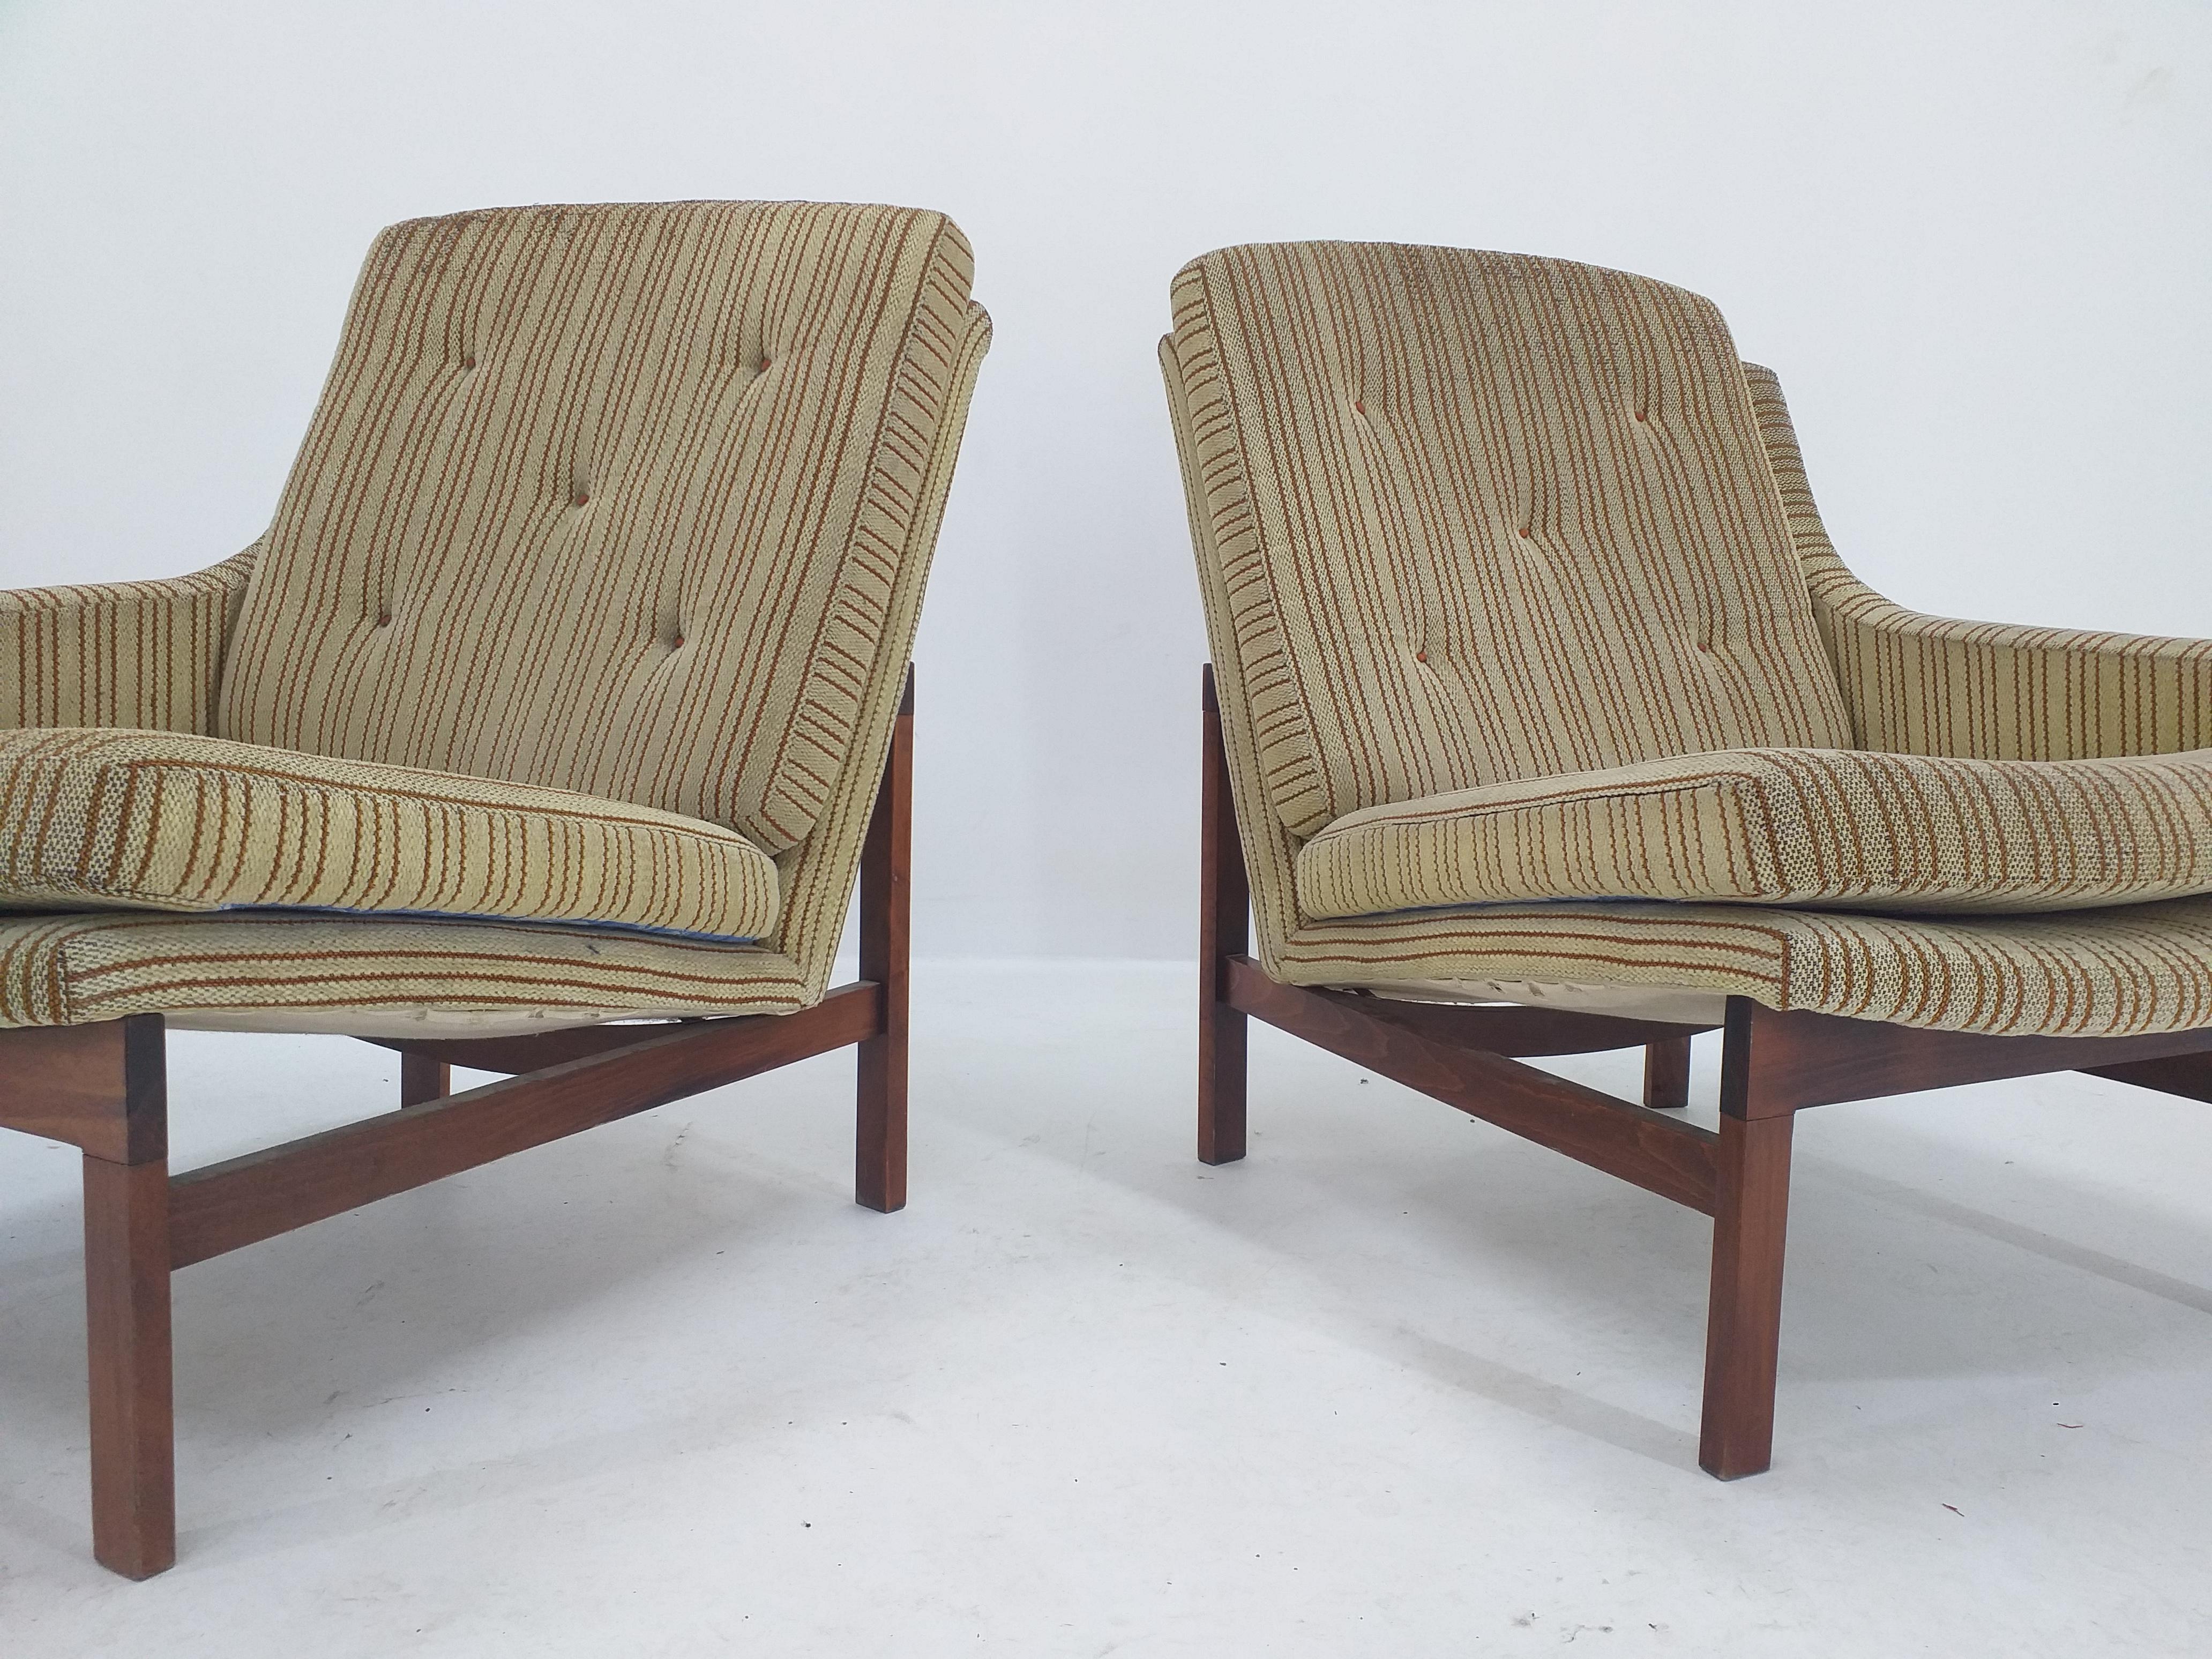 Mid-20th Century Midcentury Sofa from Two Chairs, Denmark, 1960s For Sale